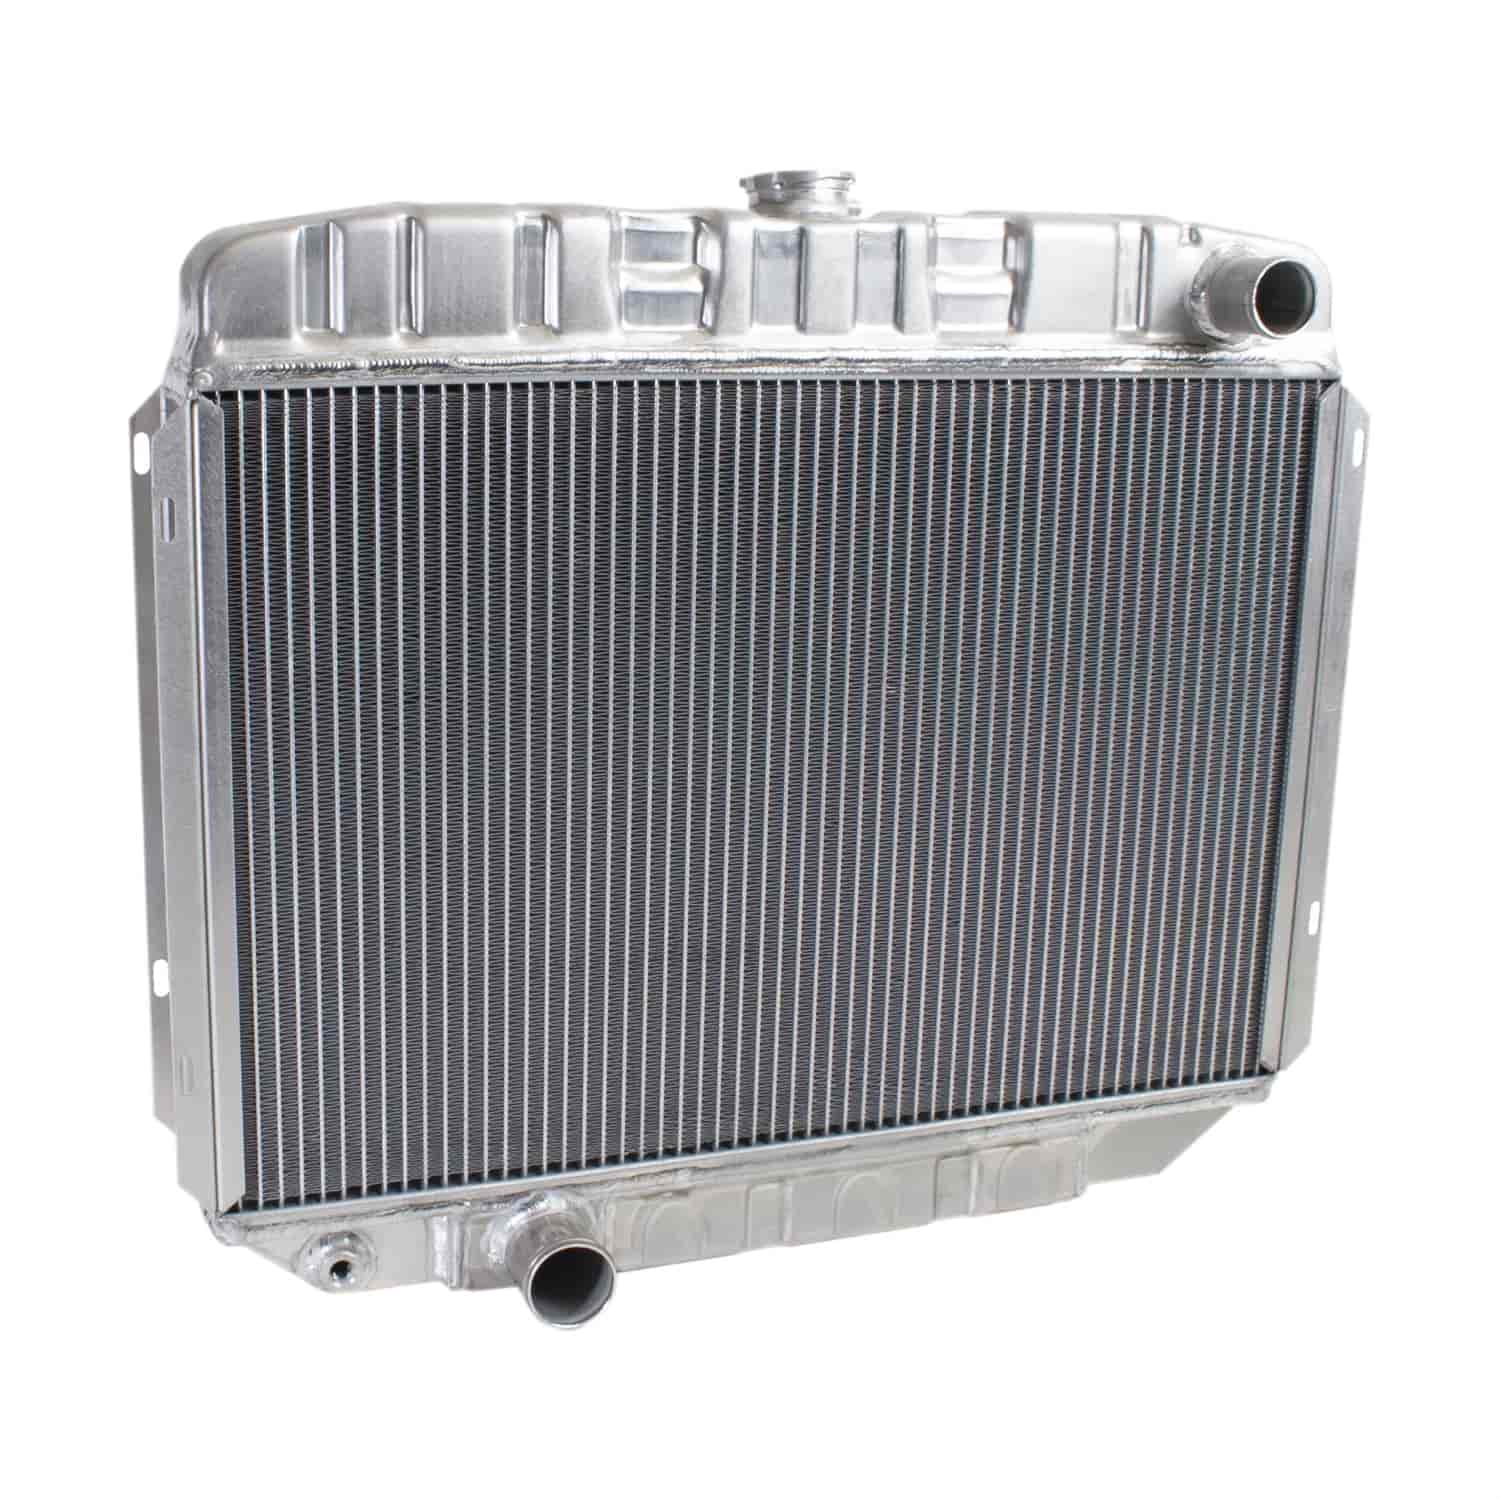 ExactFit Radiator for 1967 Ford Mustang with Big